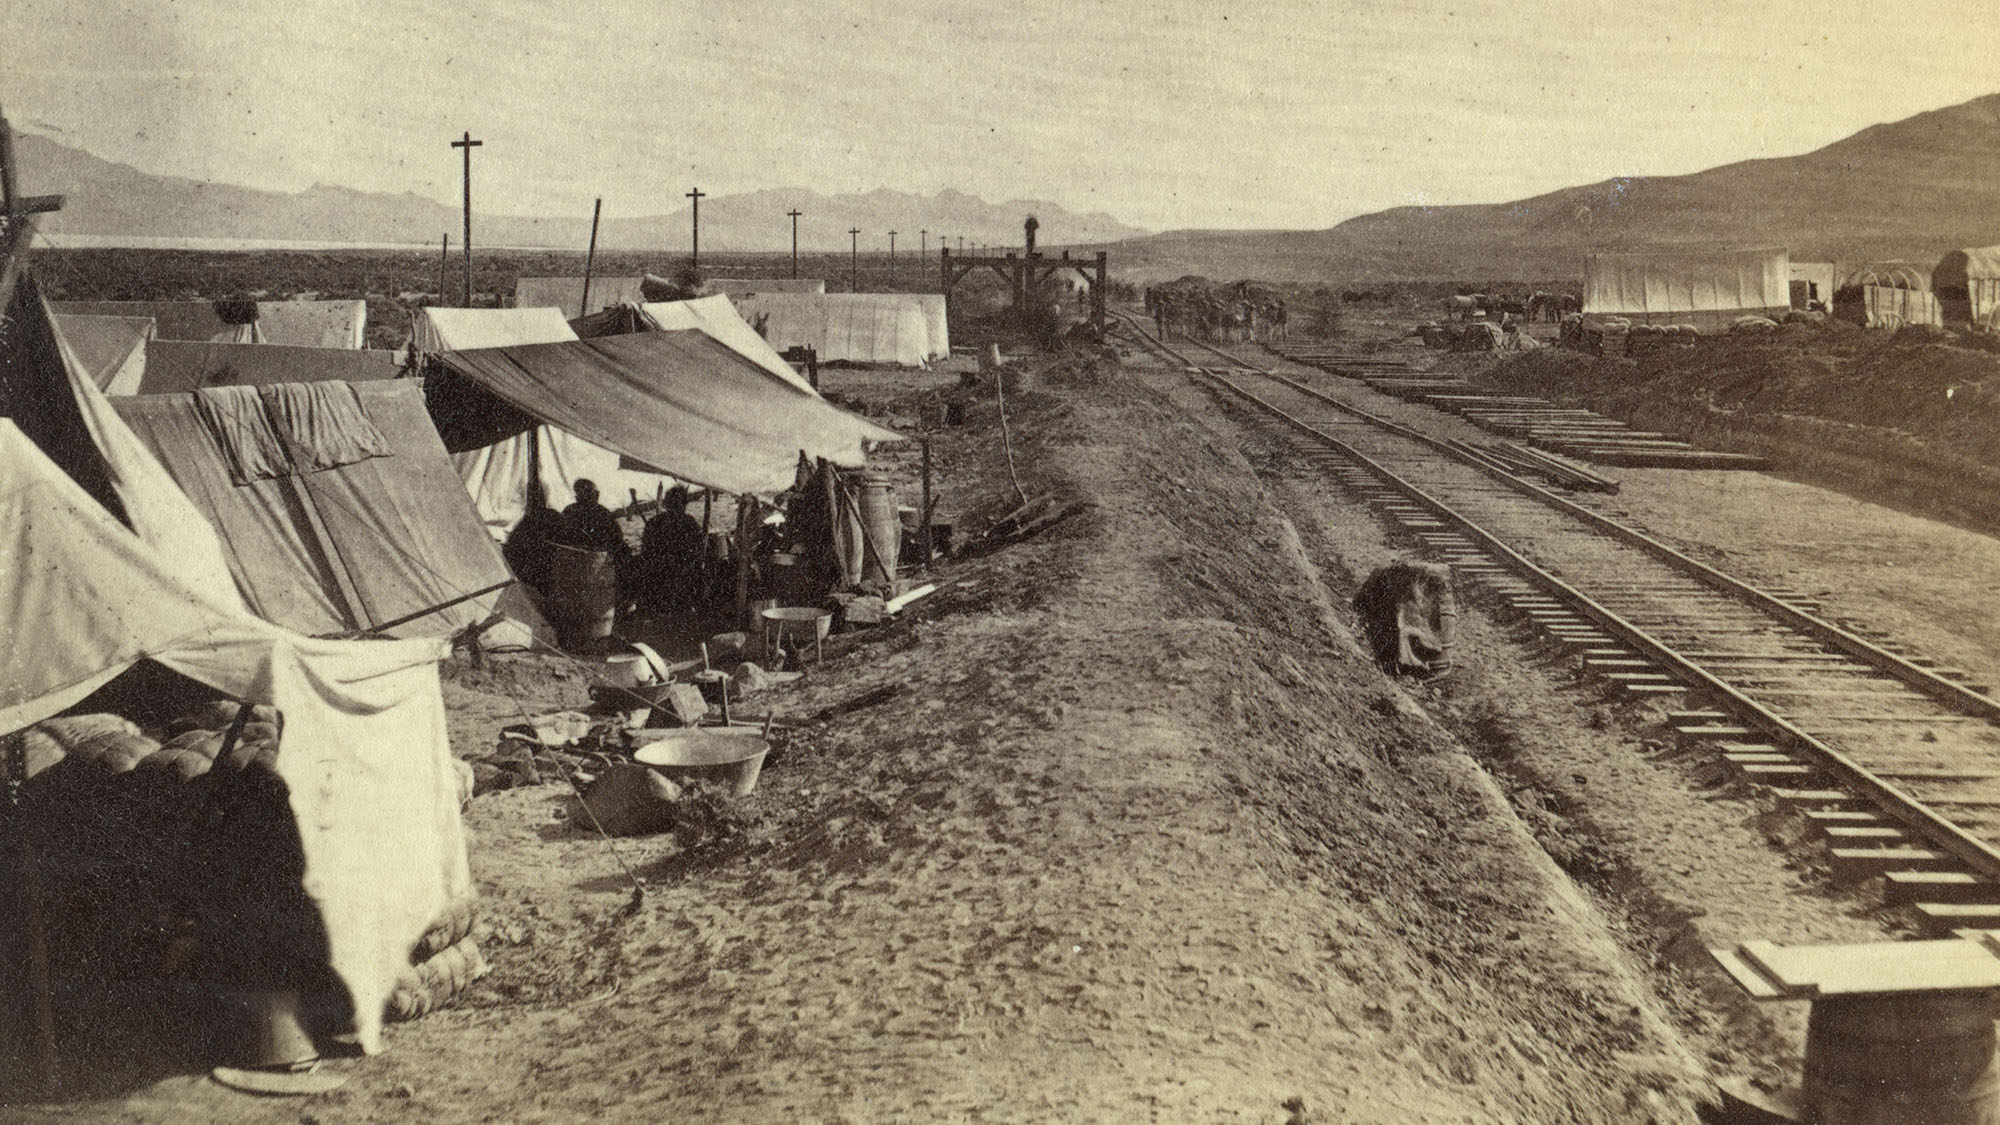 01-PC0002_313_chinese_camp_browns_station_compressed.jpg